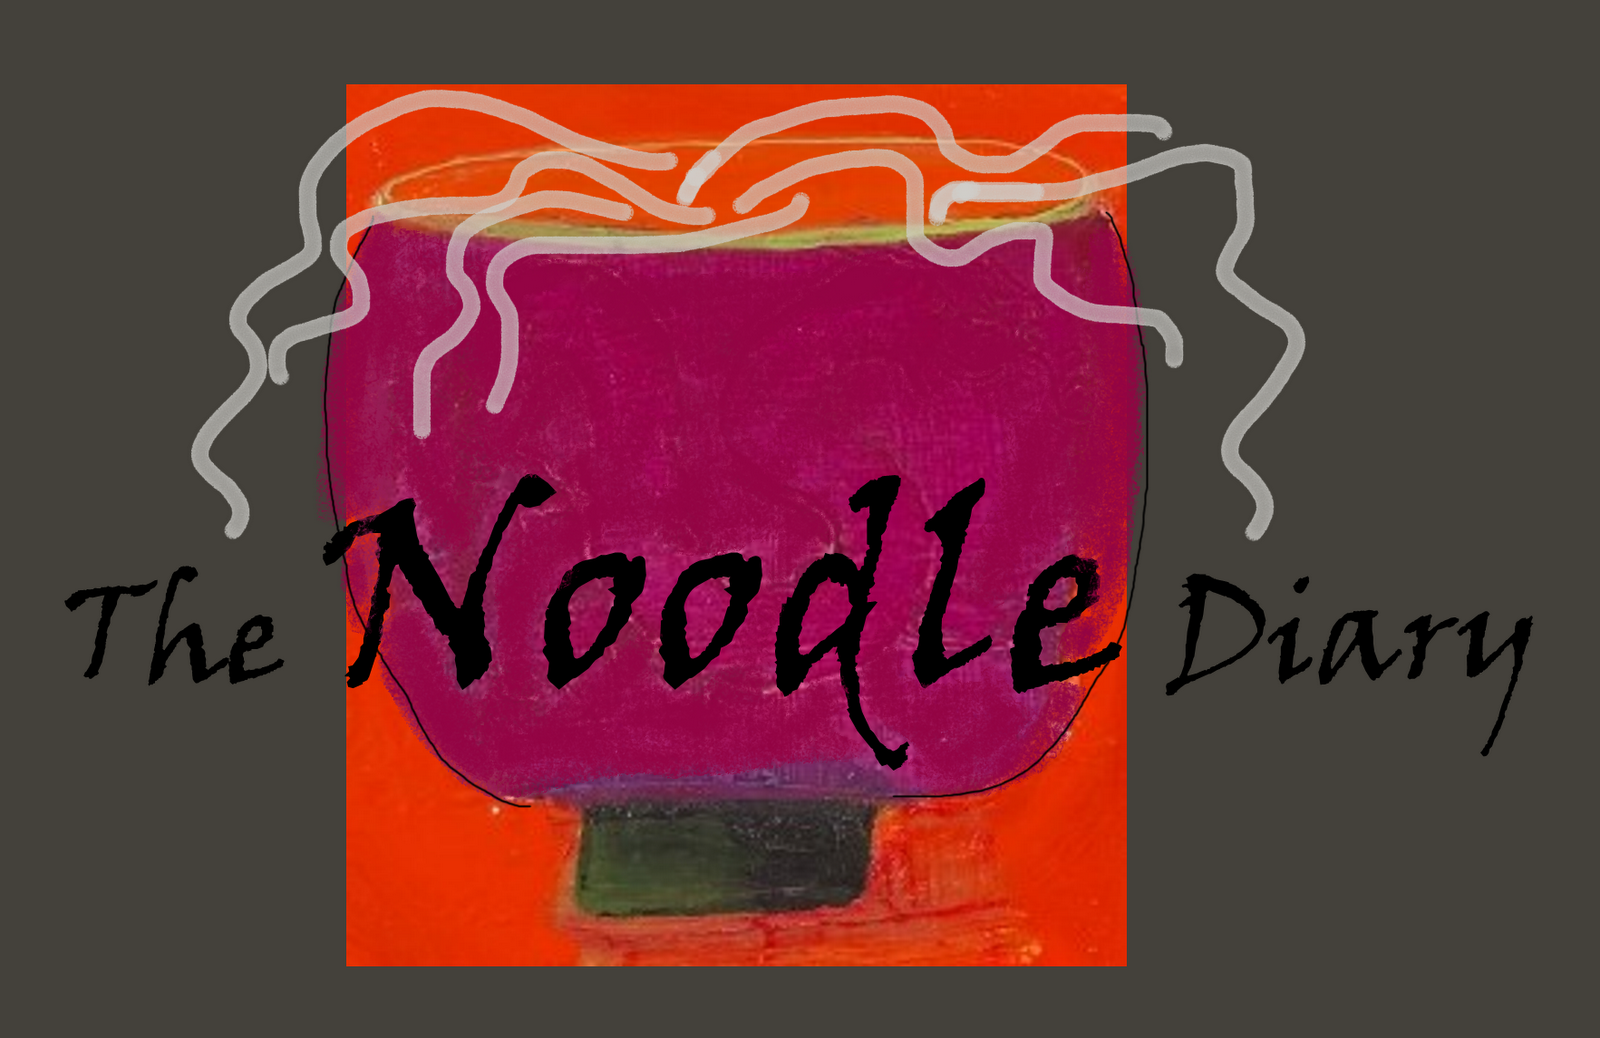 The Noodle Diary